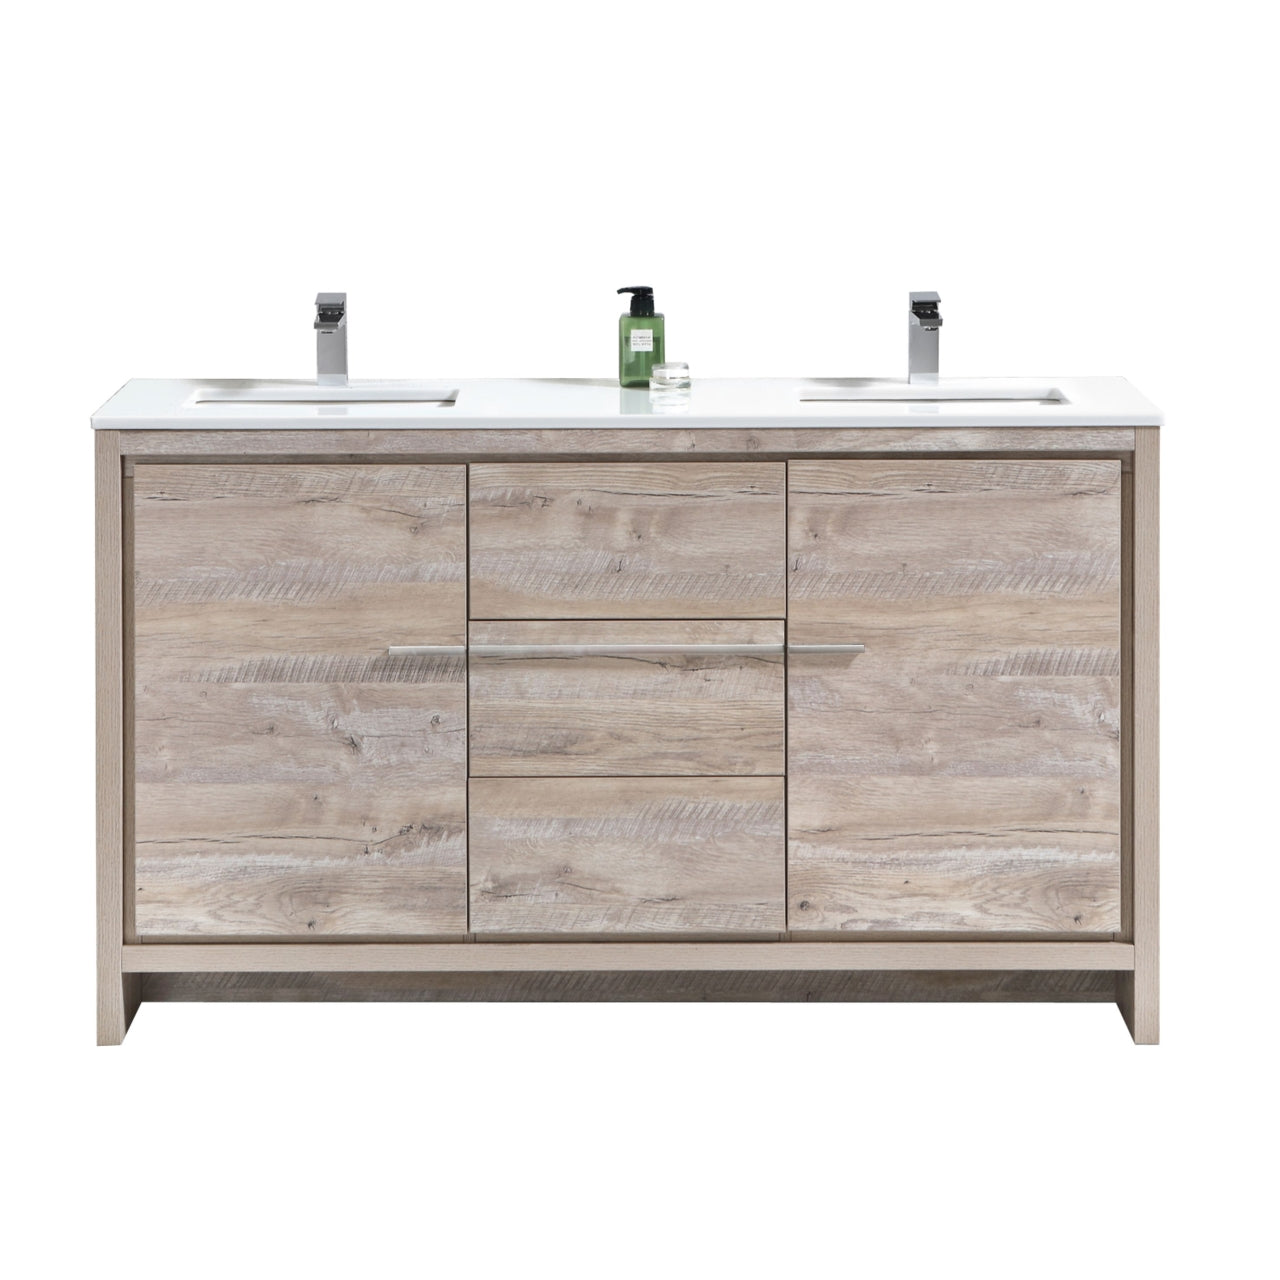 KUBEBATH Dolce AD660DNW 60" Double Bathroom Vanity in Nature Wood with White Quartz, Rectangle Sinks, Front View